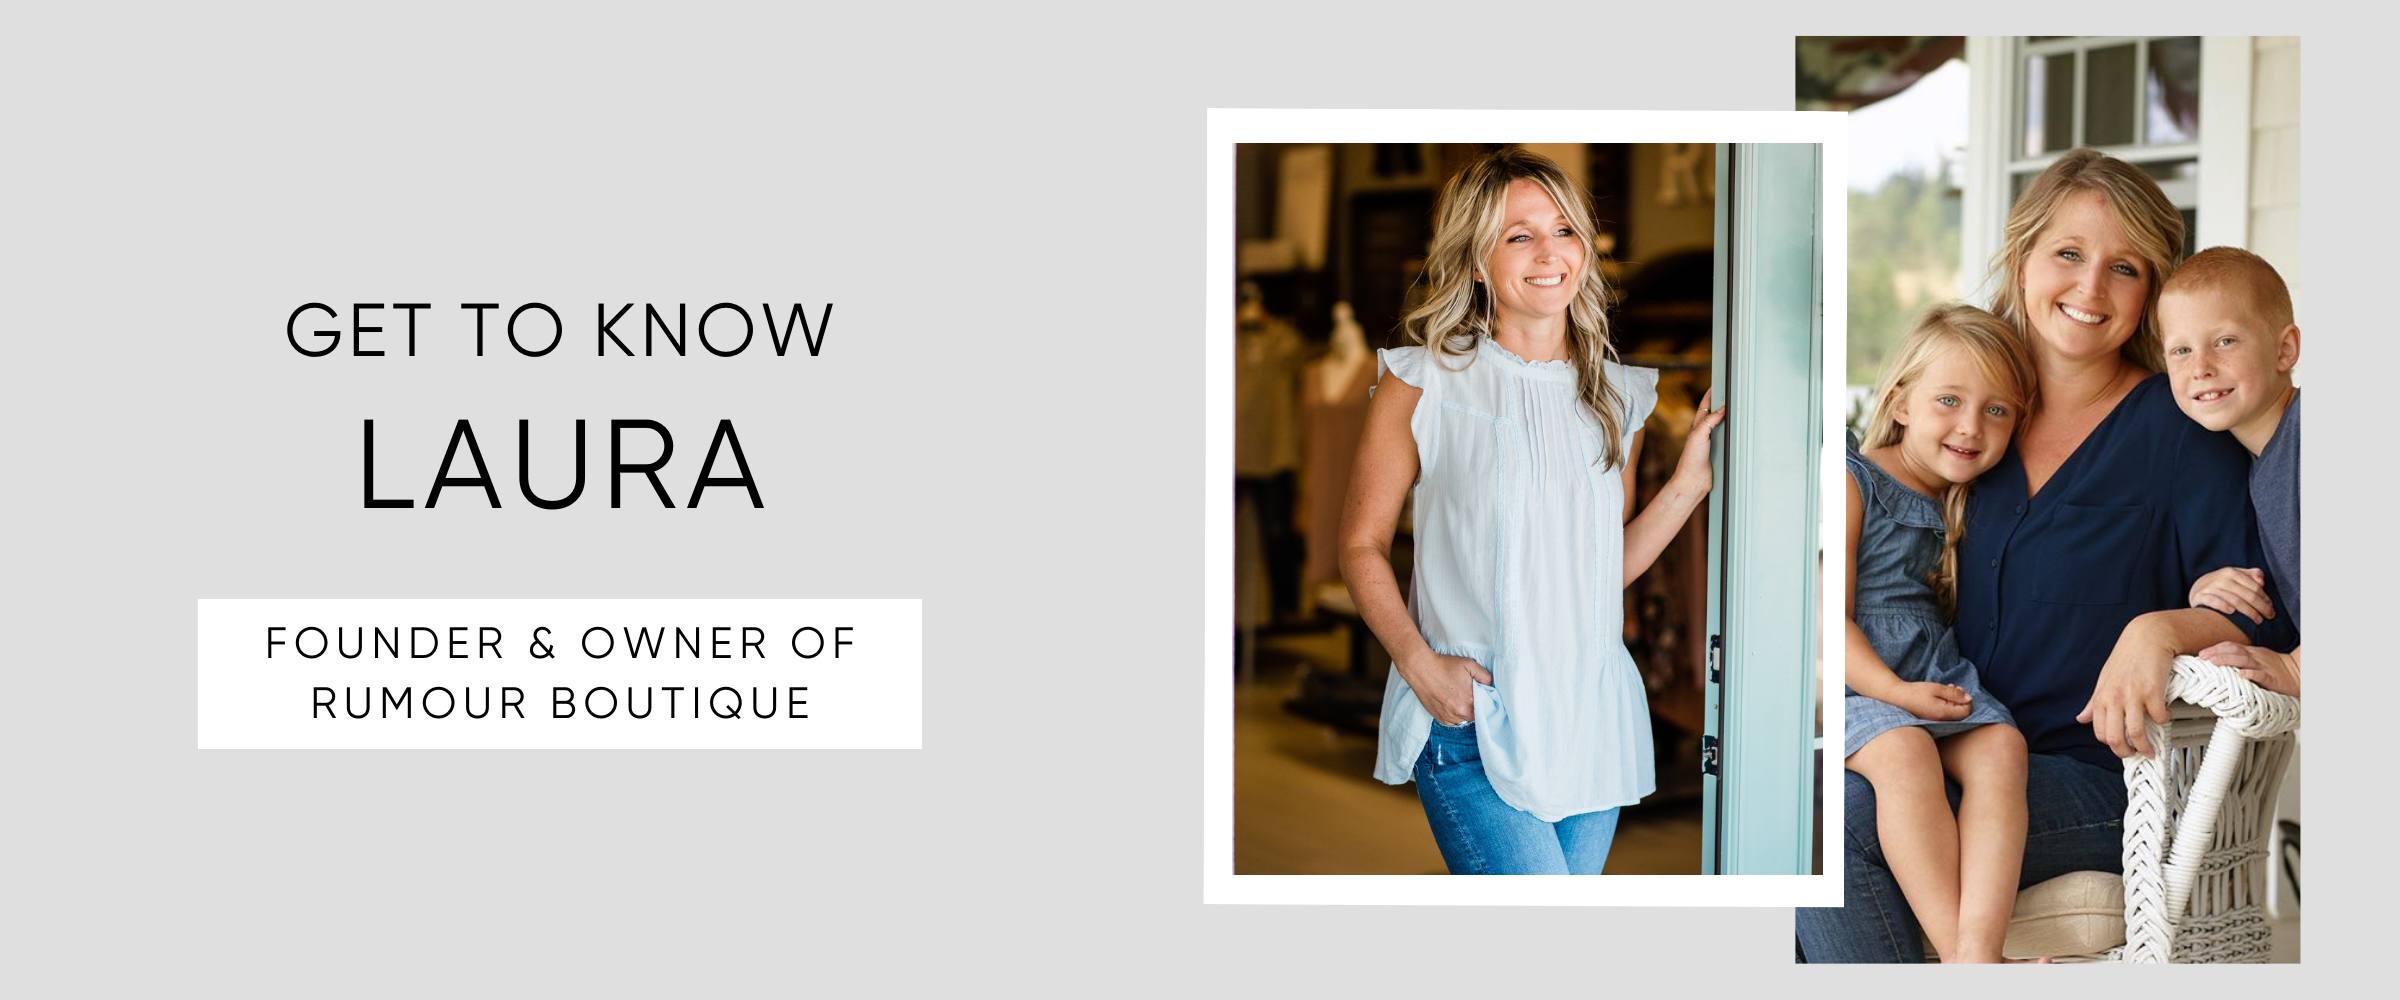 GET TO KNOW LAURA FOUNDER OF RUMOUR BOUTIQUE